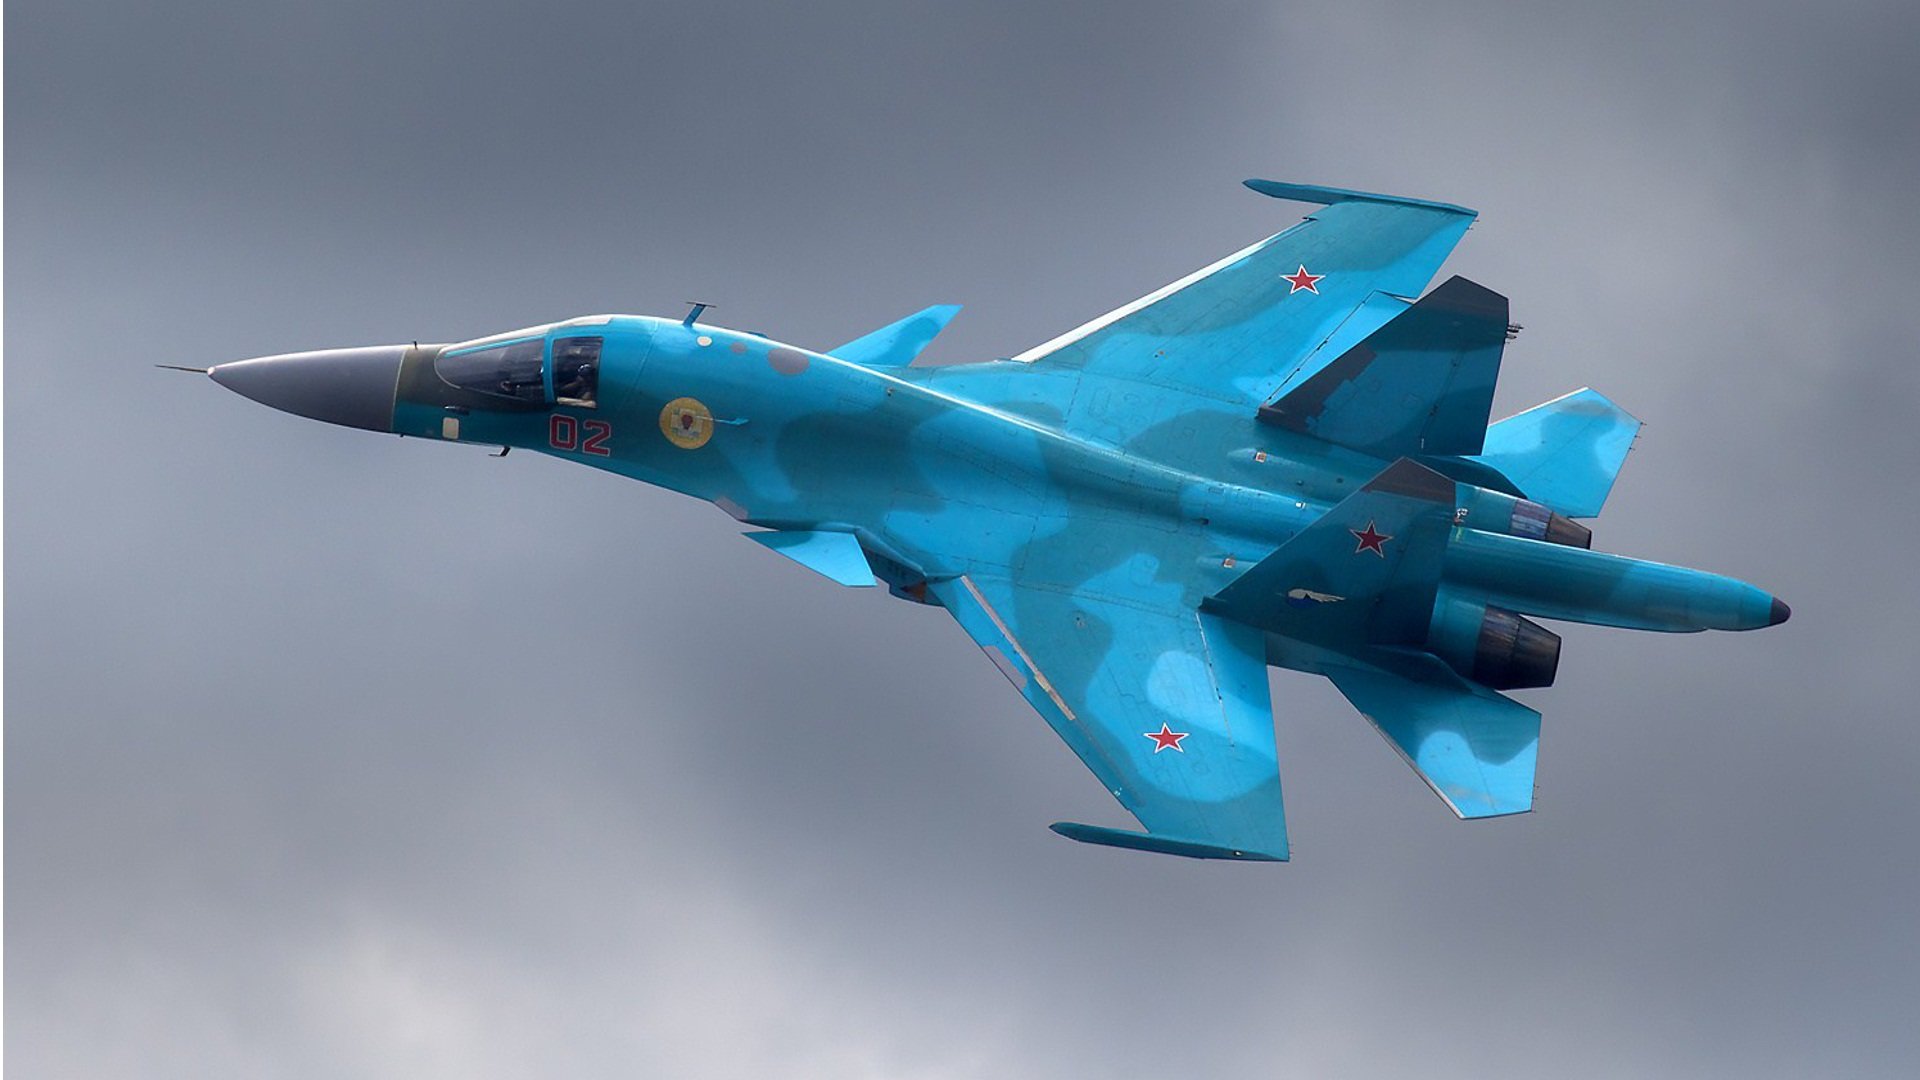 Best Sukhoi Su-34 wallpaper ID:131815 for High Resolution hd 1080p computer